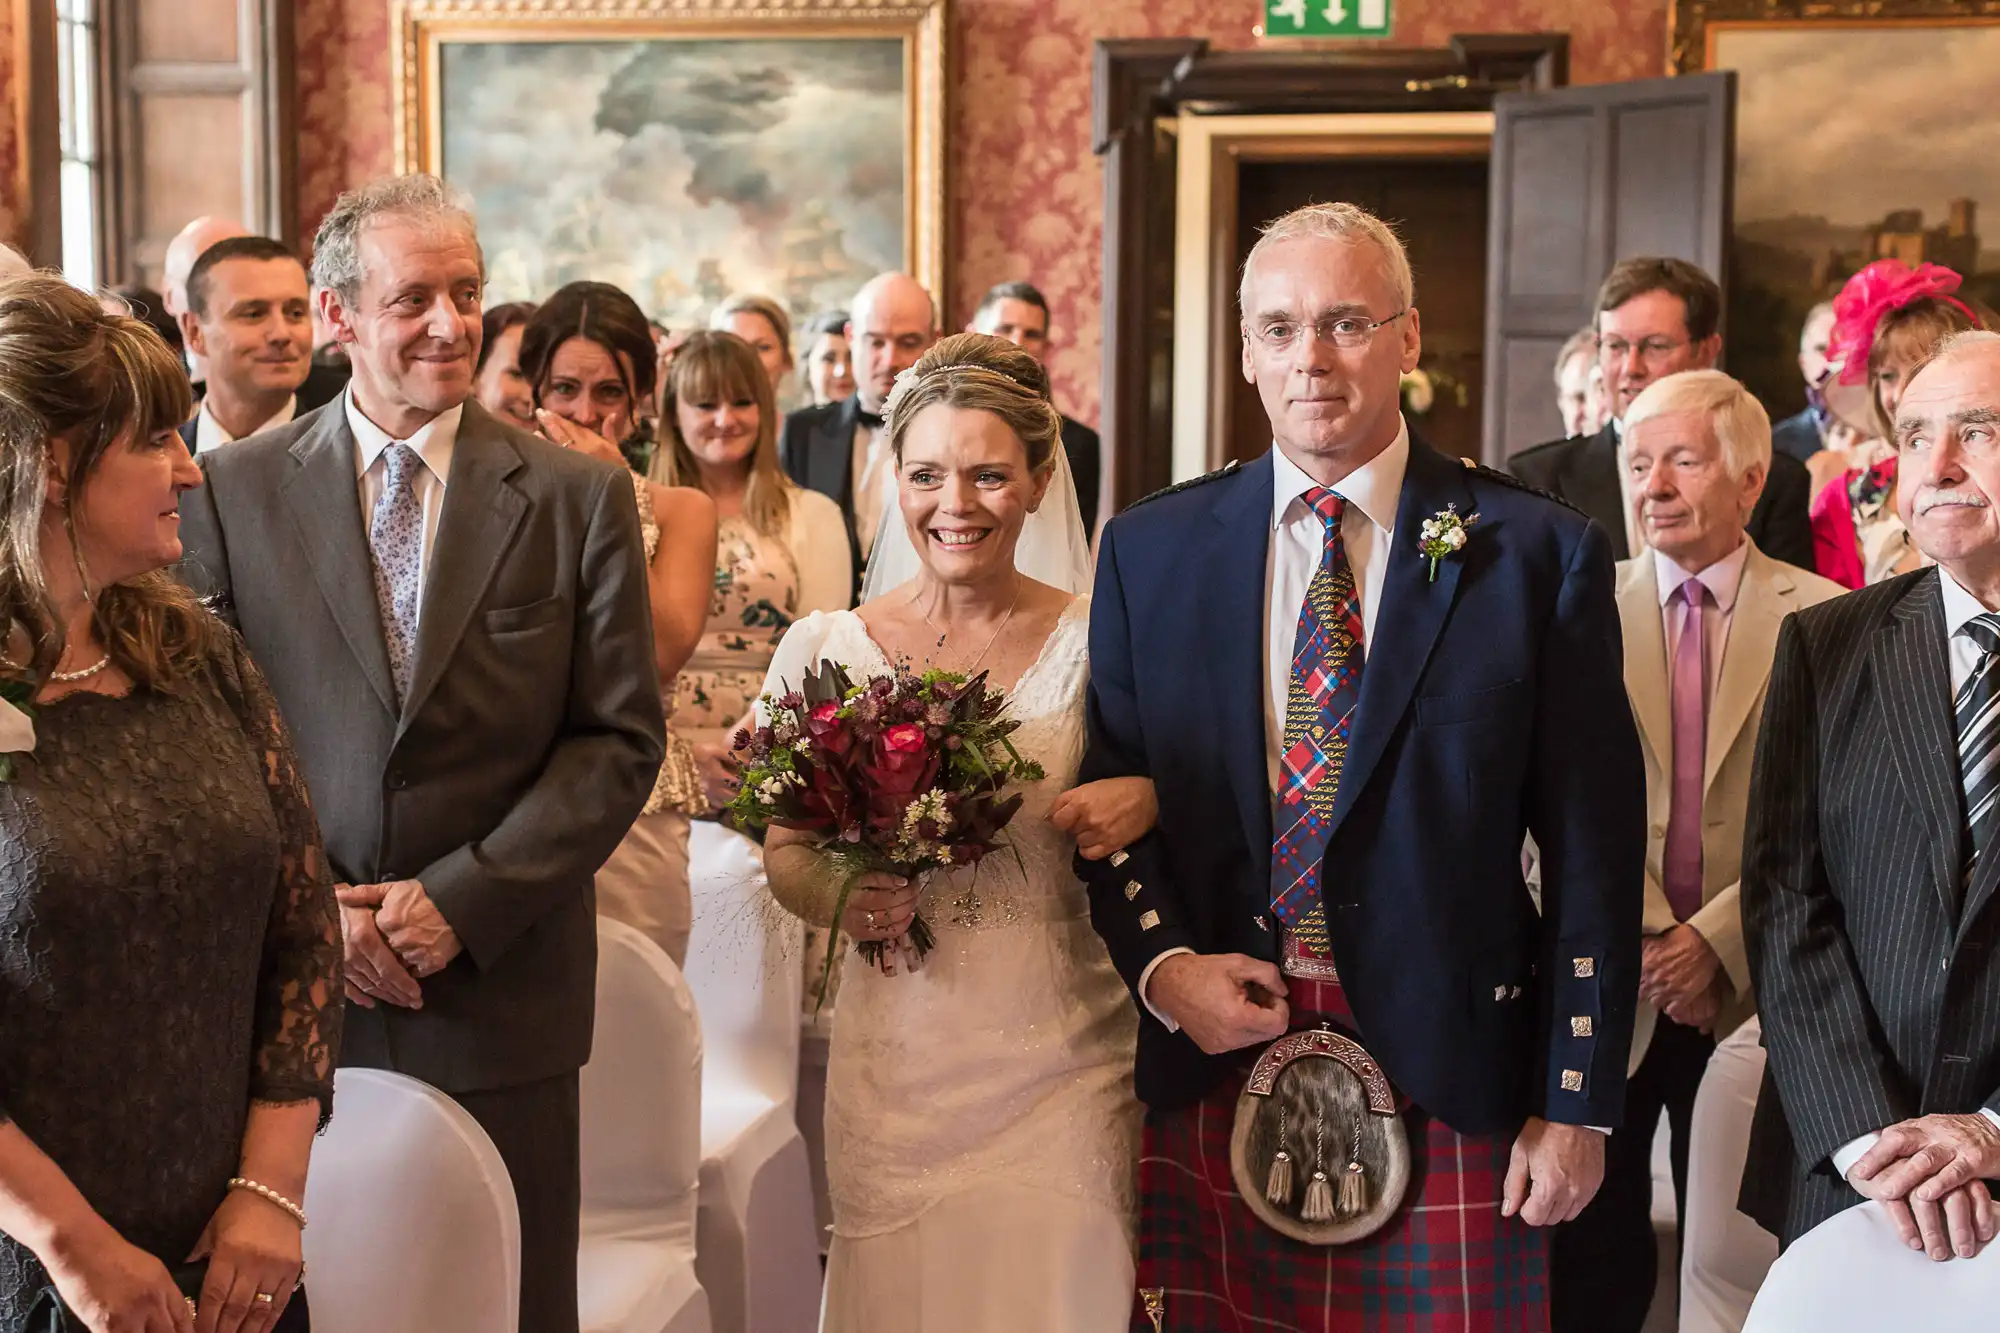 A bride and groom, the groom in a kilt, walk down the aisle smiling, surrounded by guests in a room with ornate decorations and paintings.